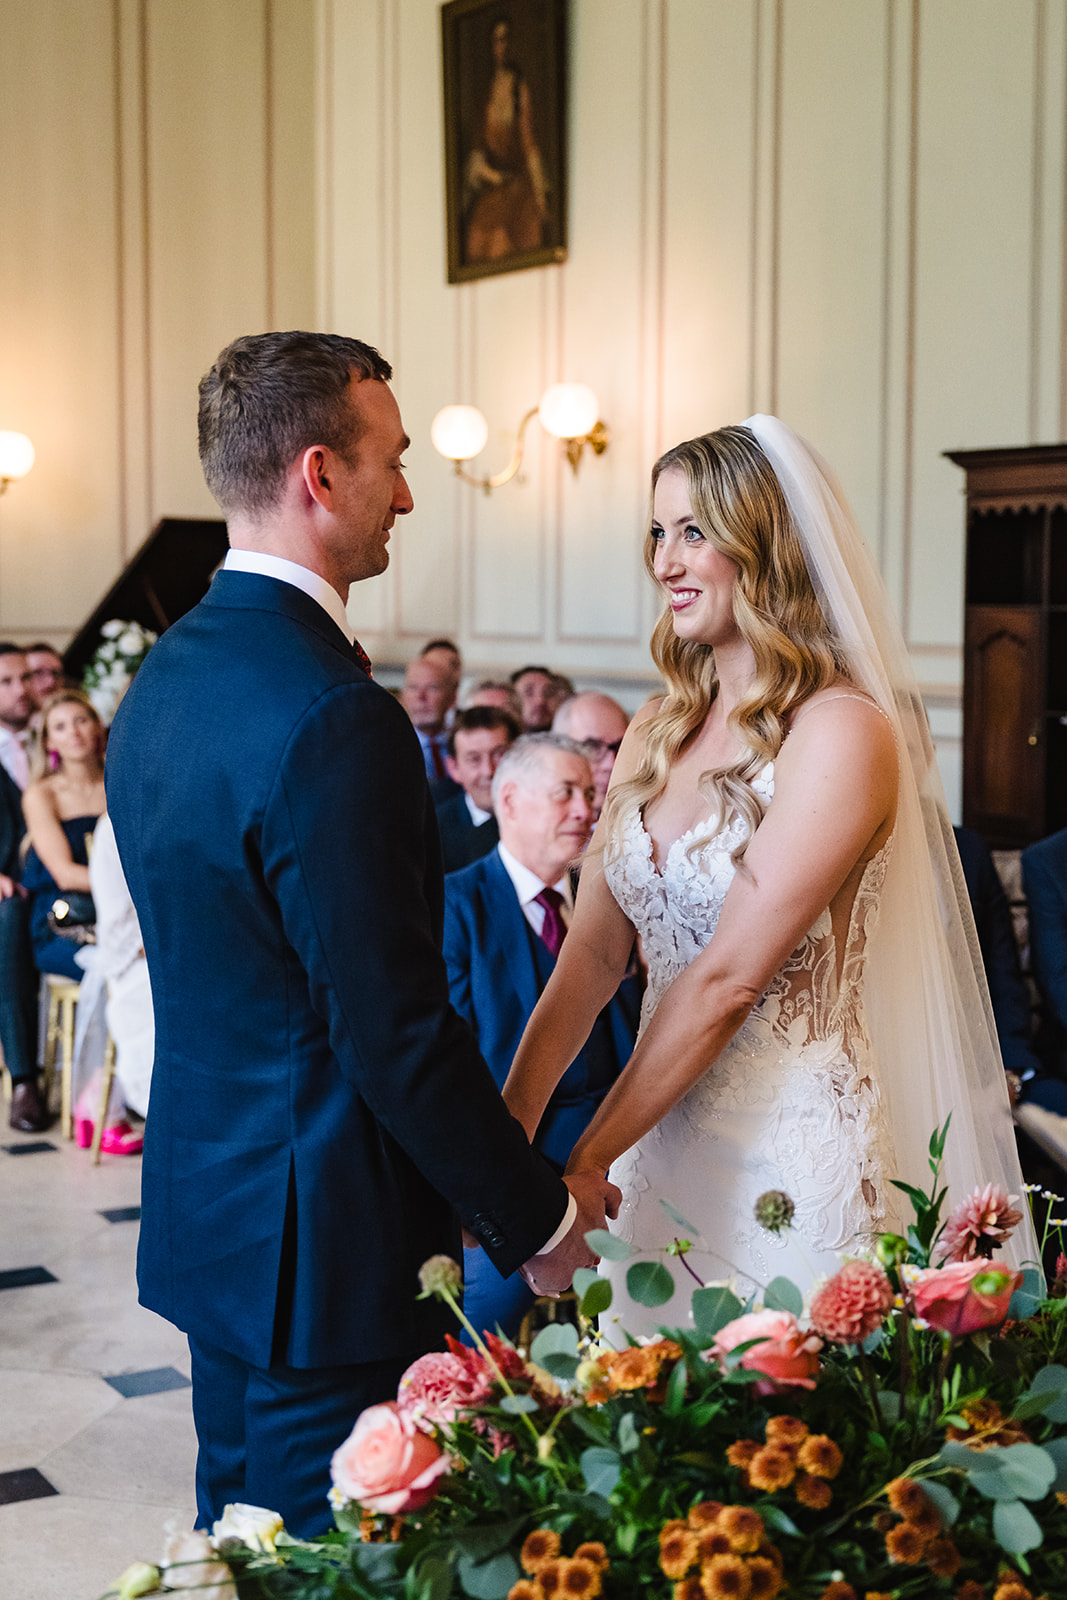 Bride and groom exchanging vows in gosfield halls grand salon